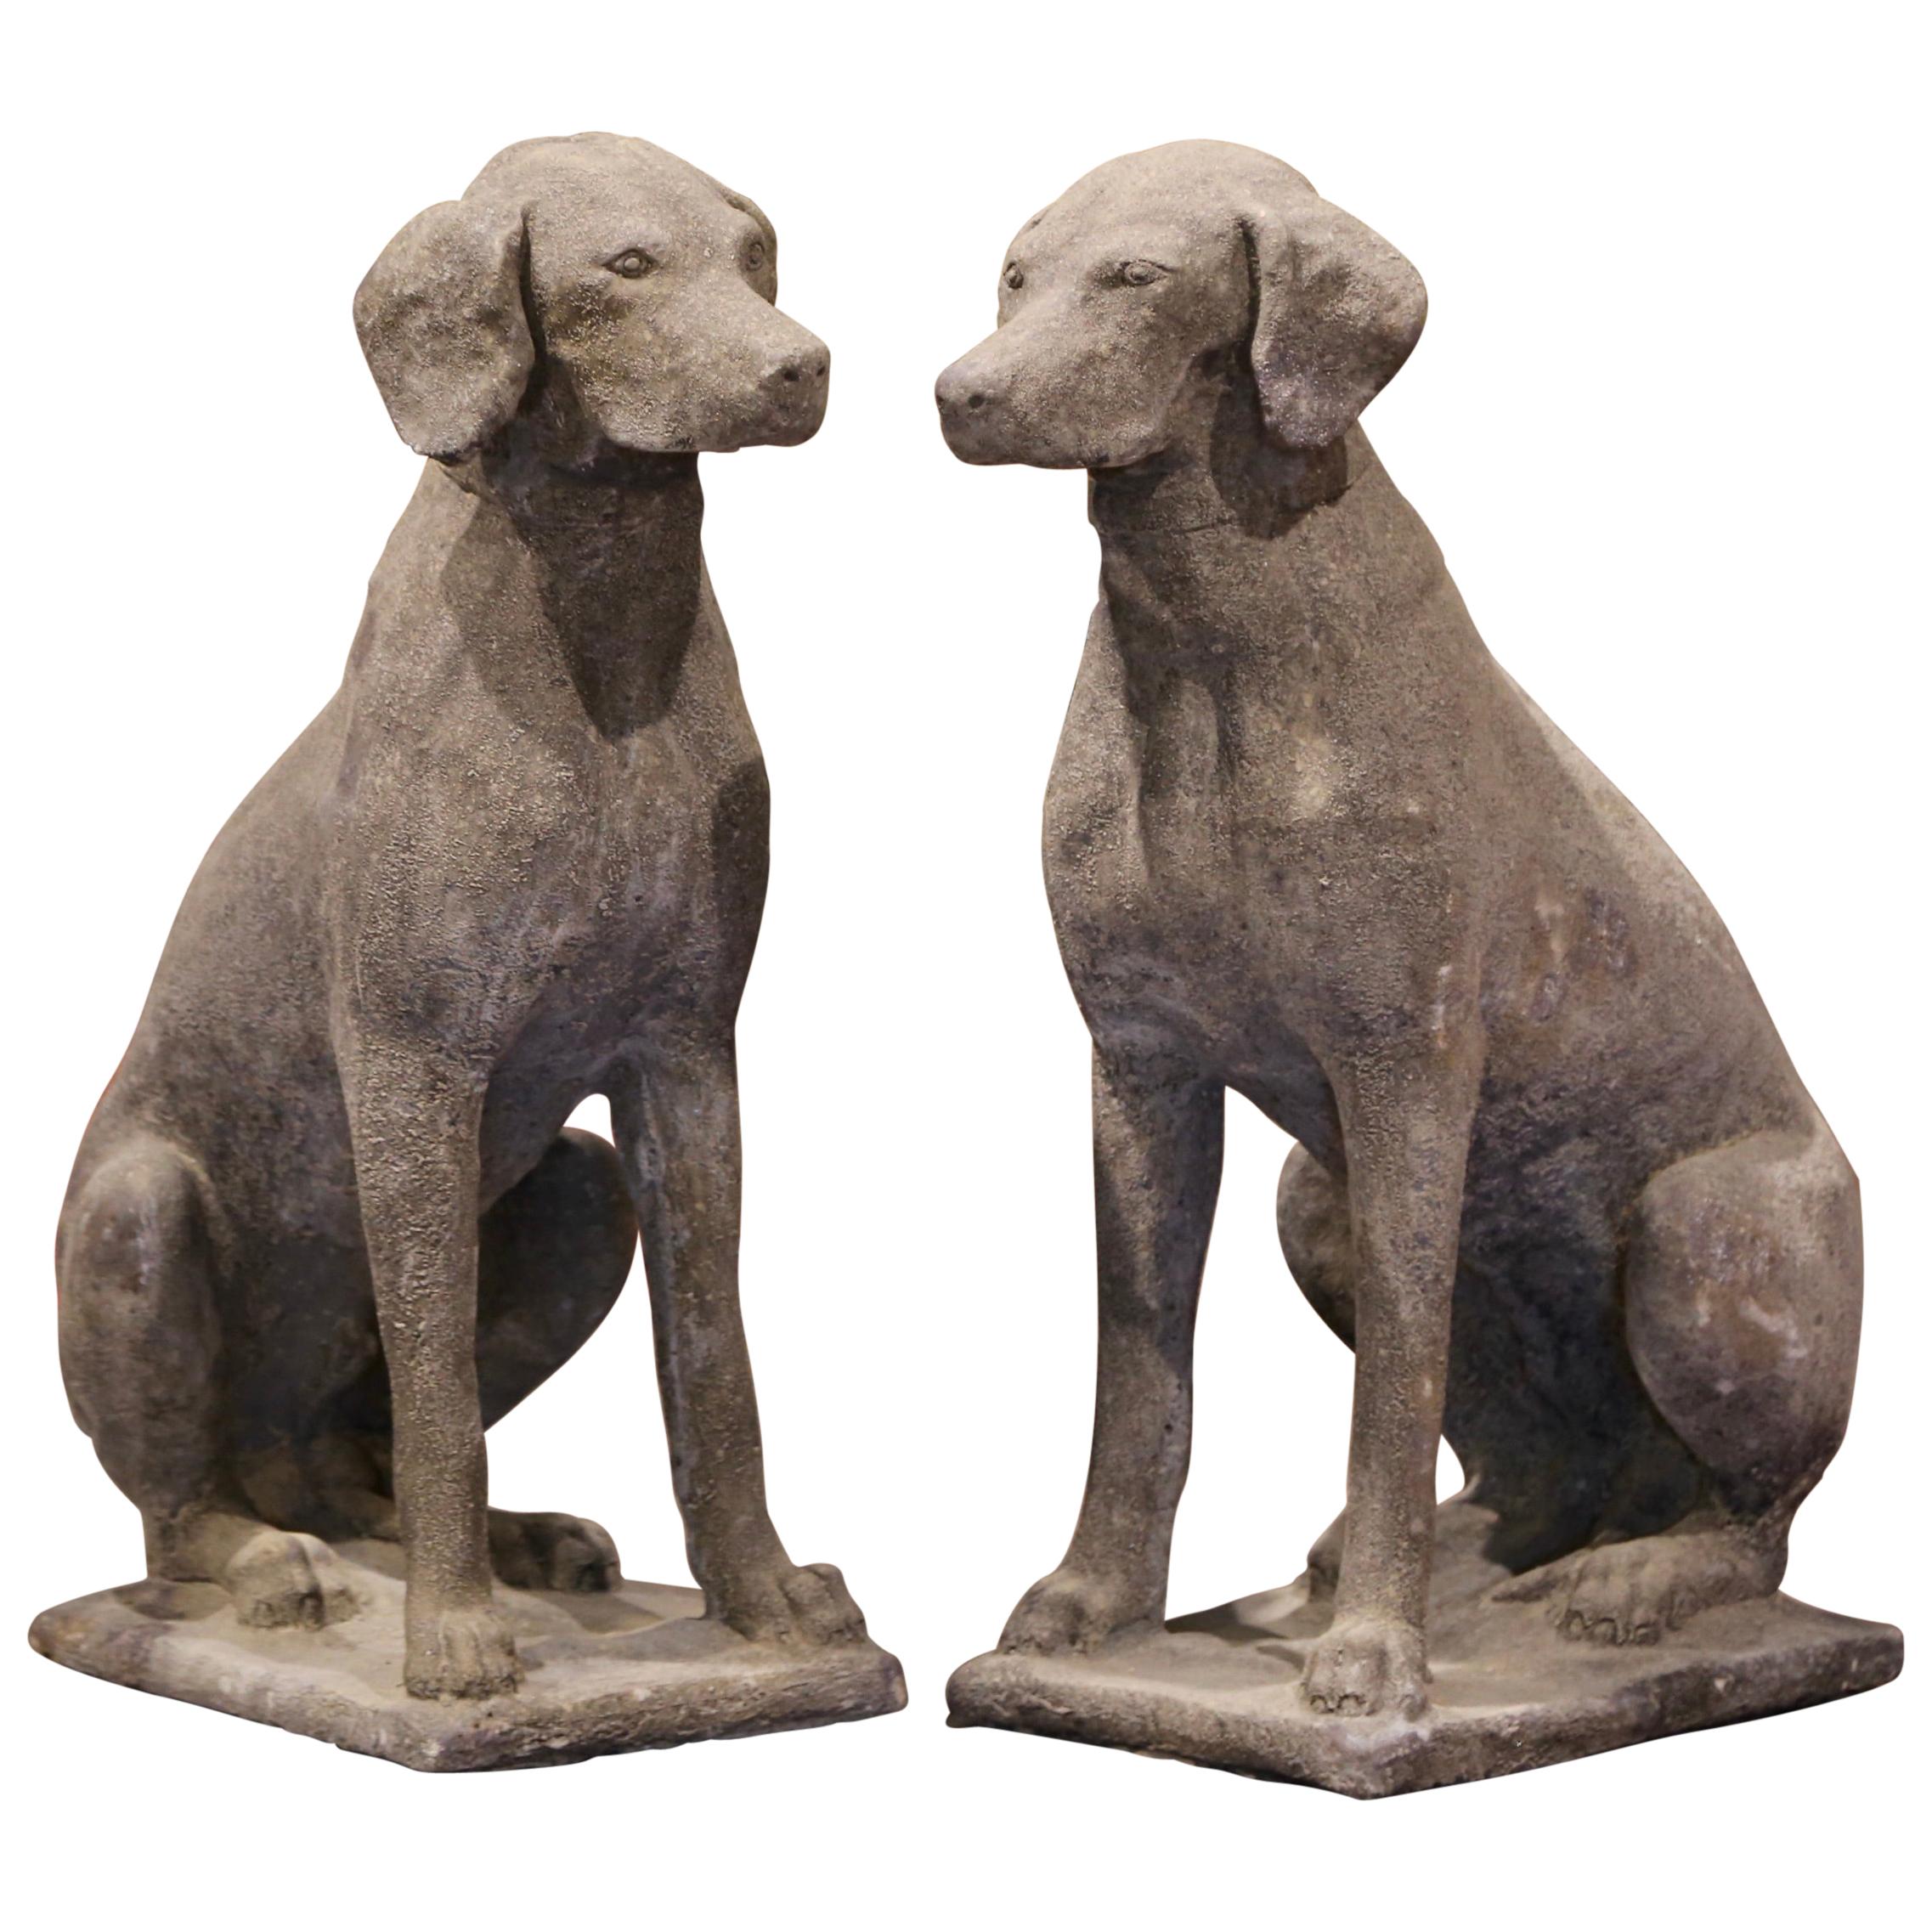 Pair of French Weathered Carved Stone Labrador Dog Sculptures Garden Statuary